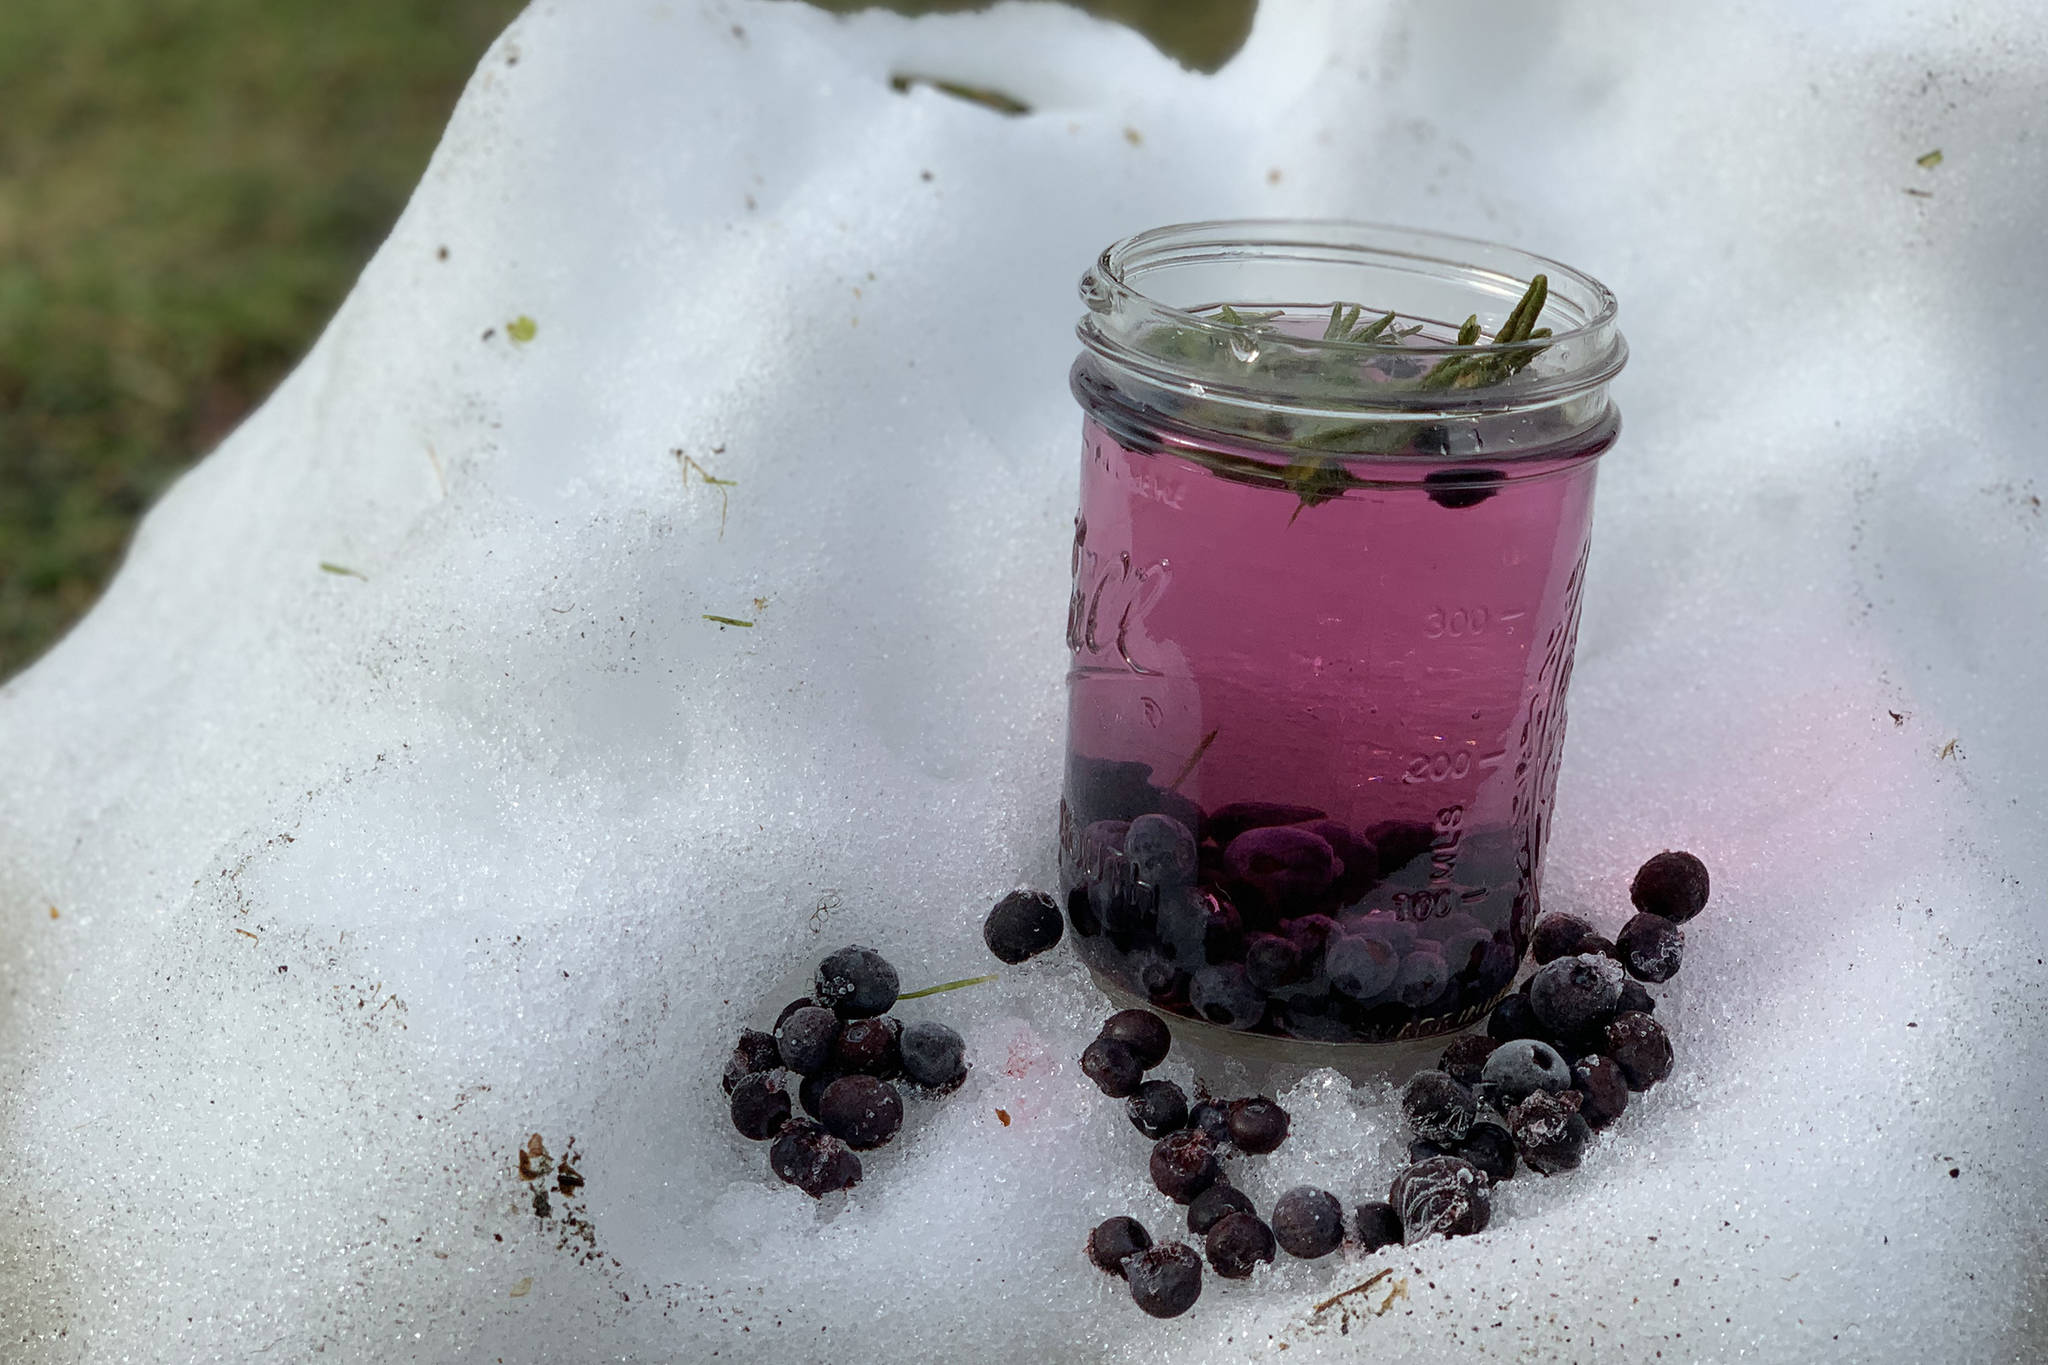 Planet Alaska: Berries are a perfect cure for the winter blues